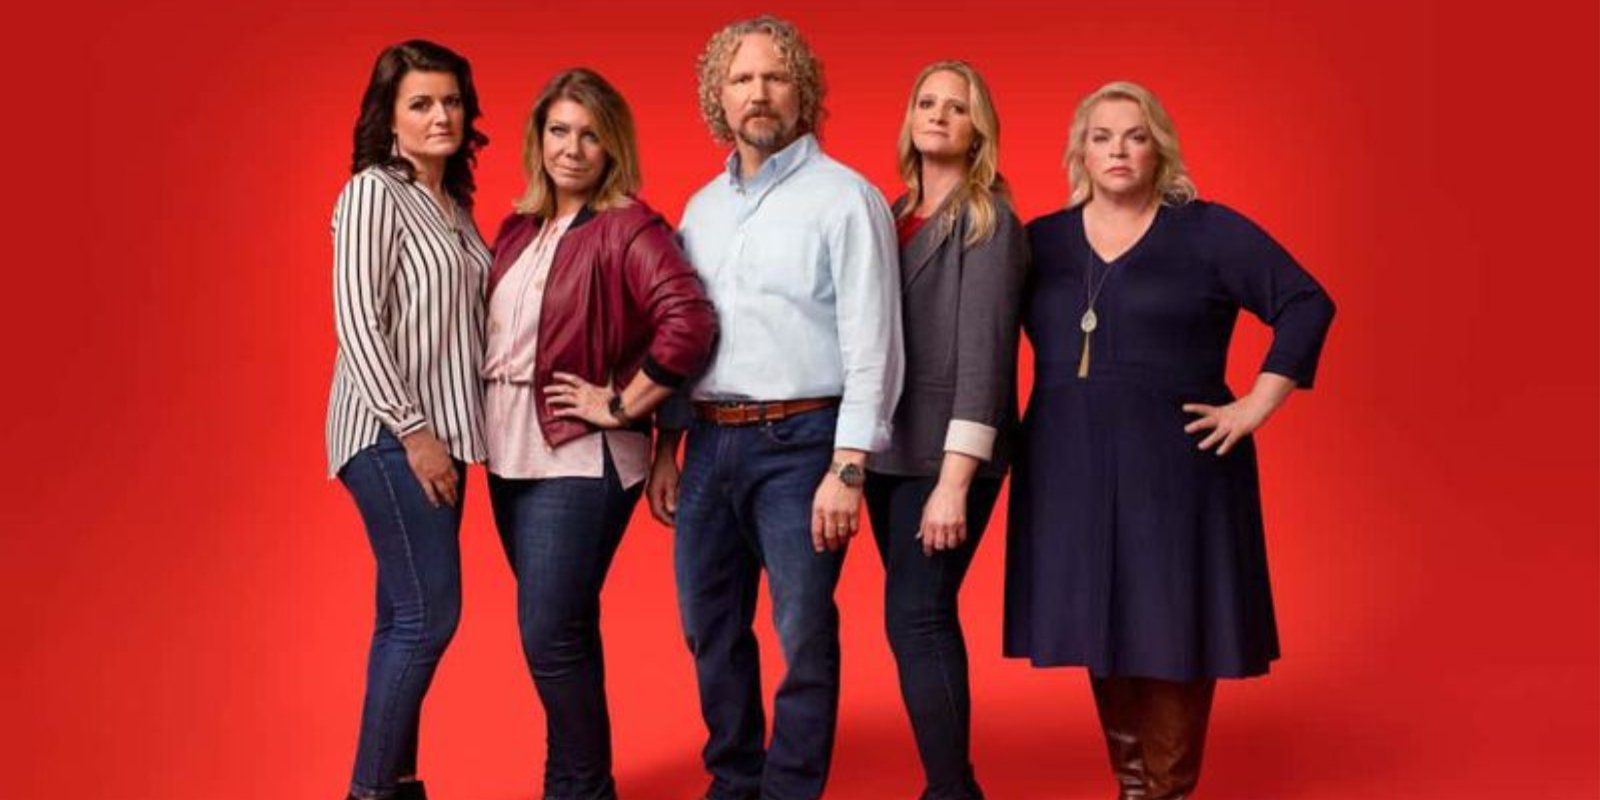 The cast of TLC's 'Sister Wives' includes Meri, Robyn, Kody, Janelle, and Christine Brown.